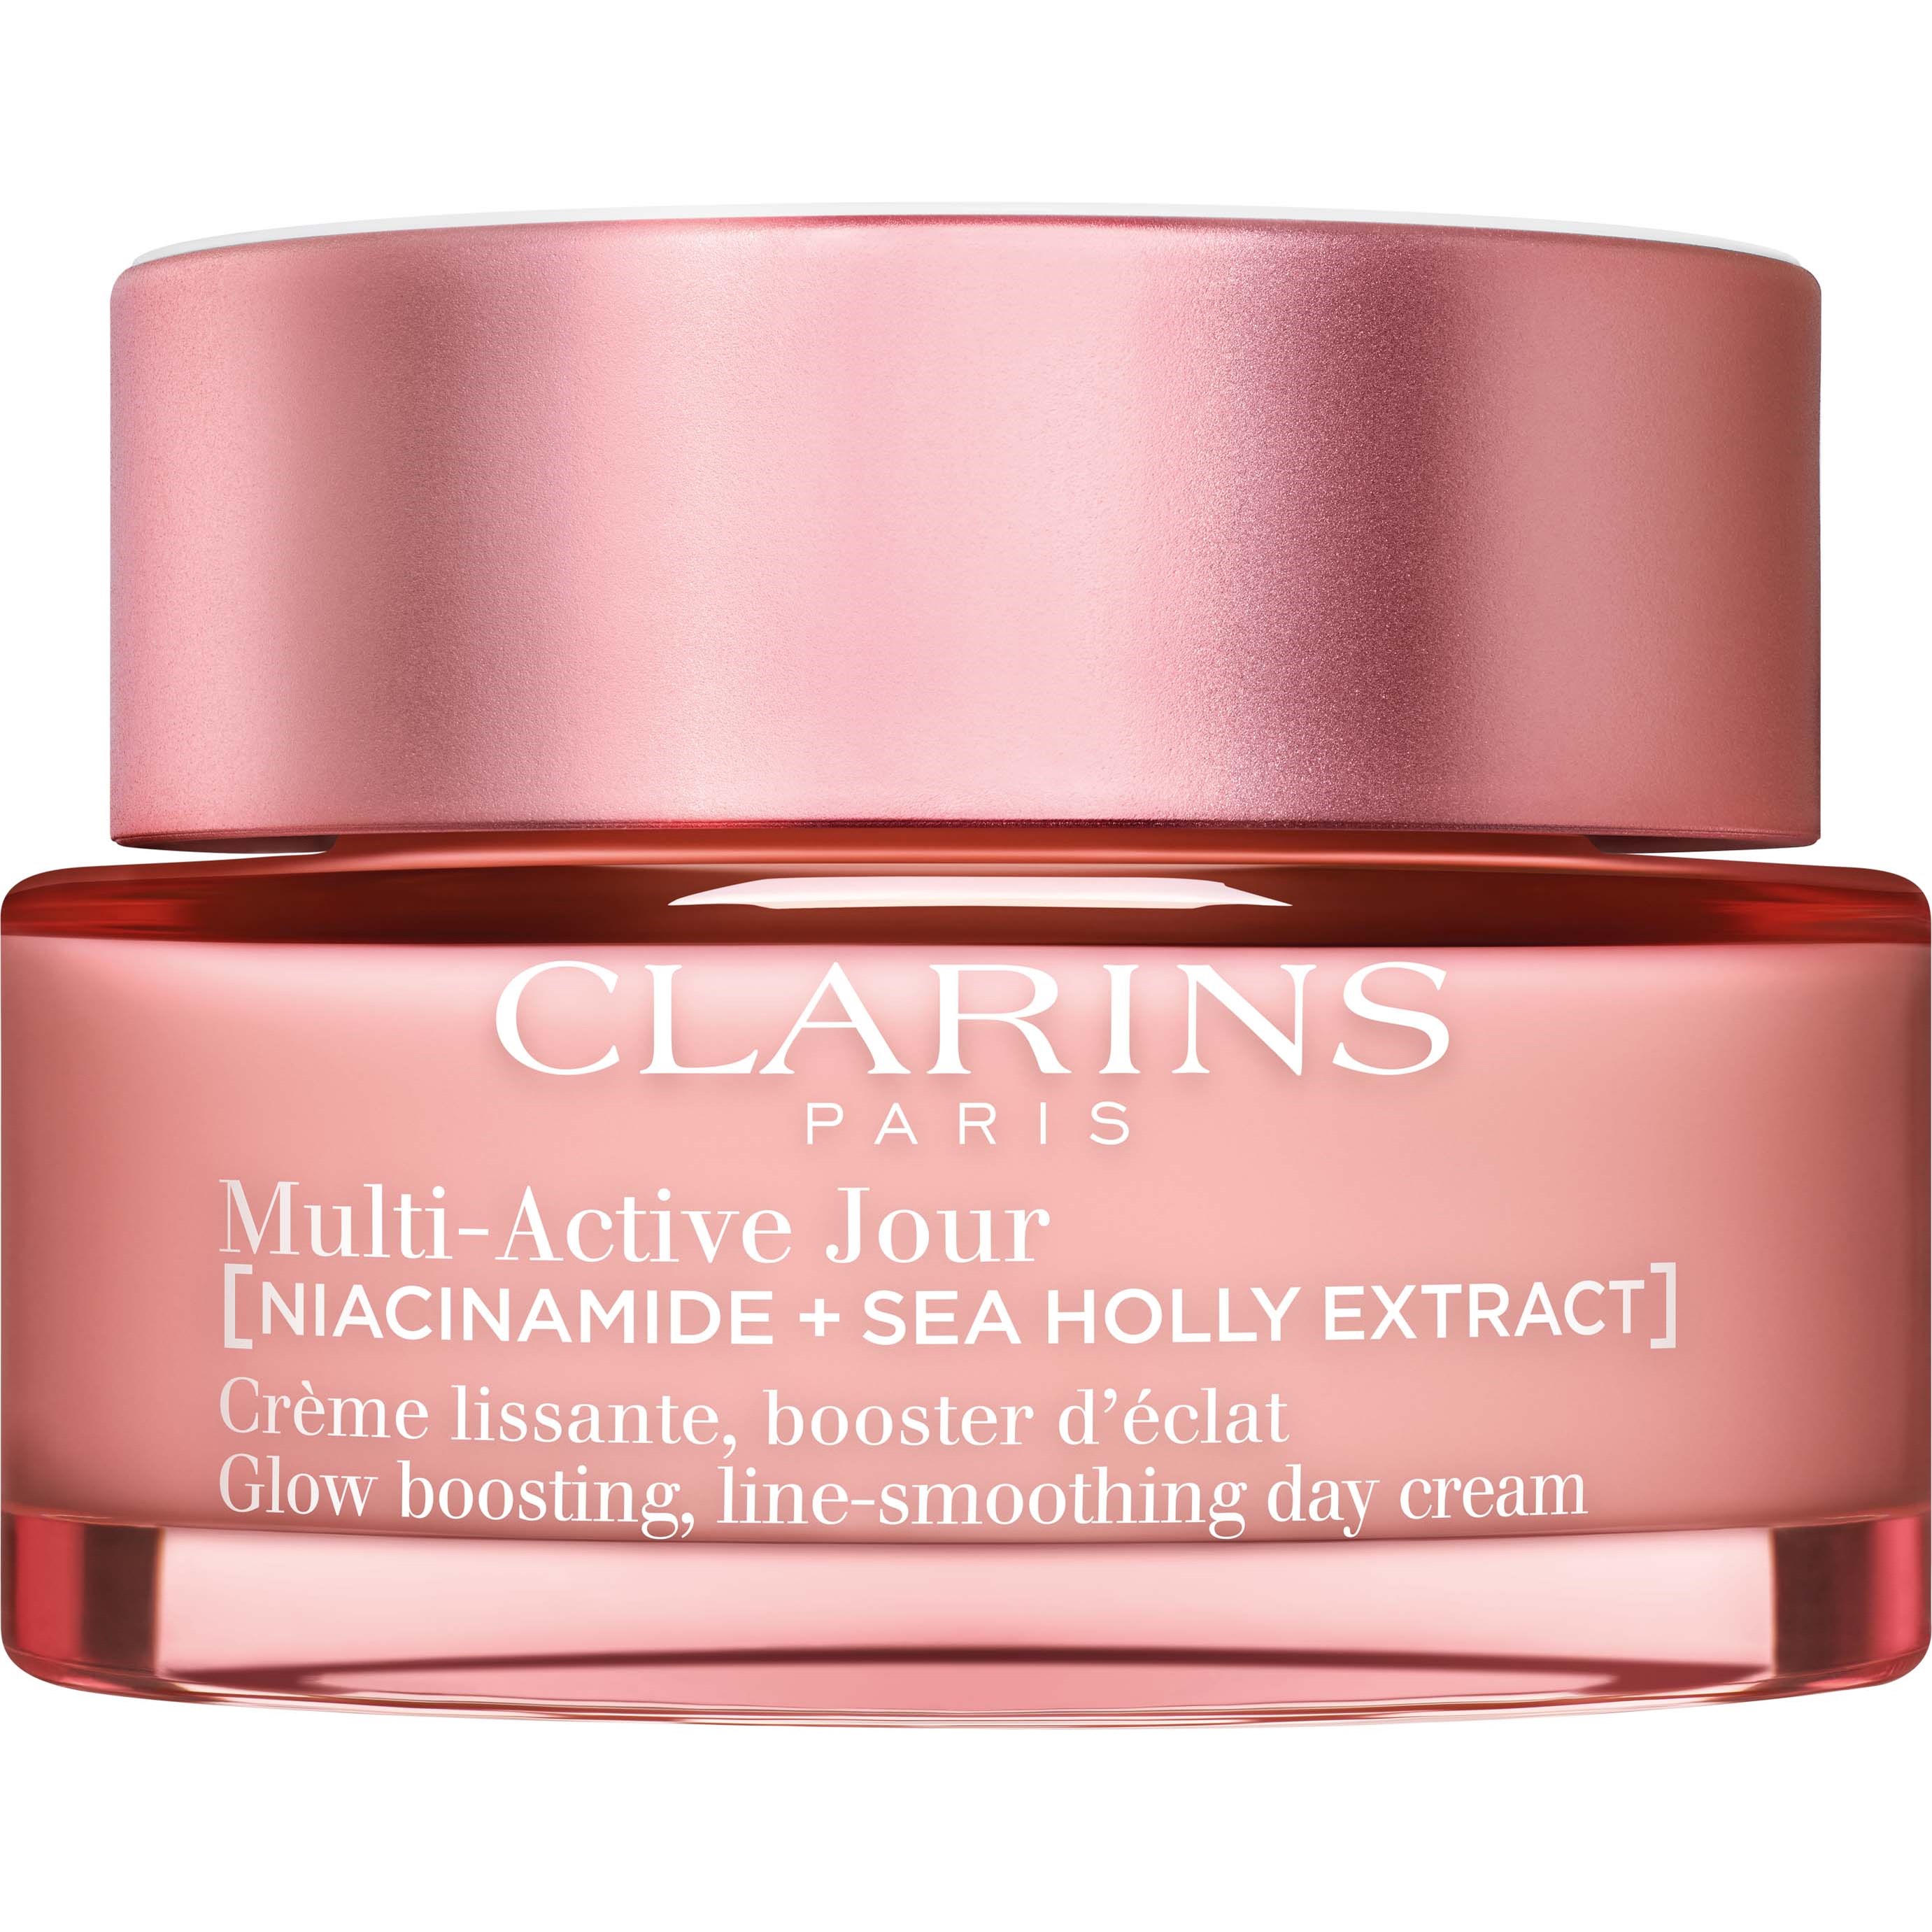 Läs mer om Clarins Multi-Active Glow Boosting, Line-smoothing Day Cream Dry Skin